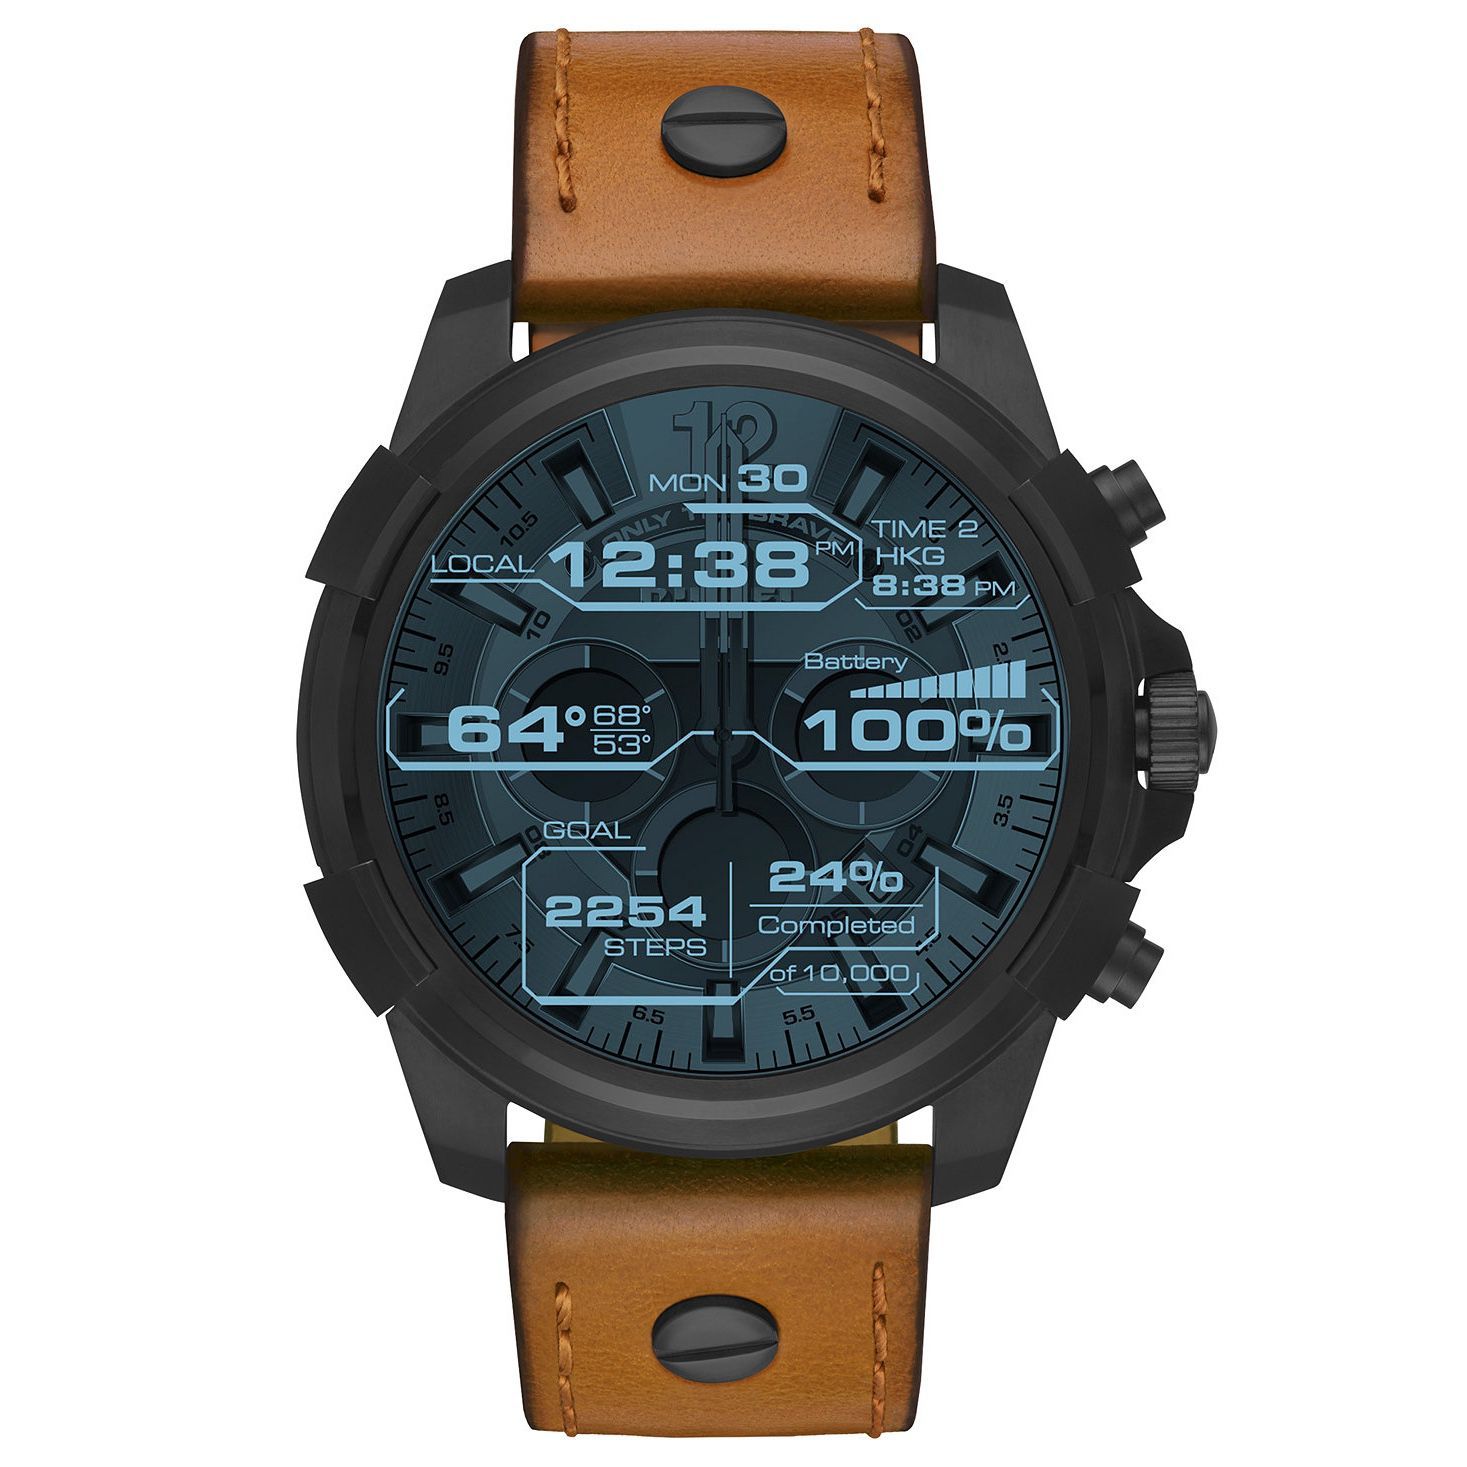 Diesel ON Full Guard Android Wear Smartwatch